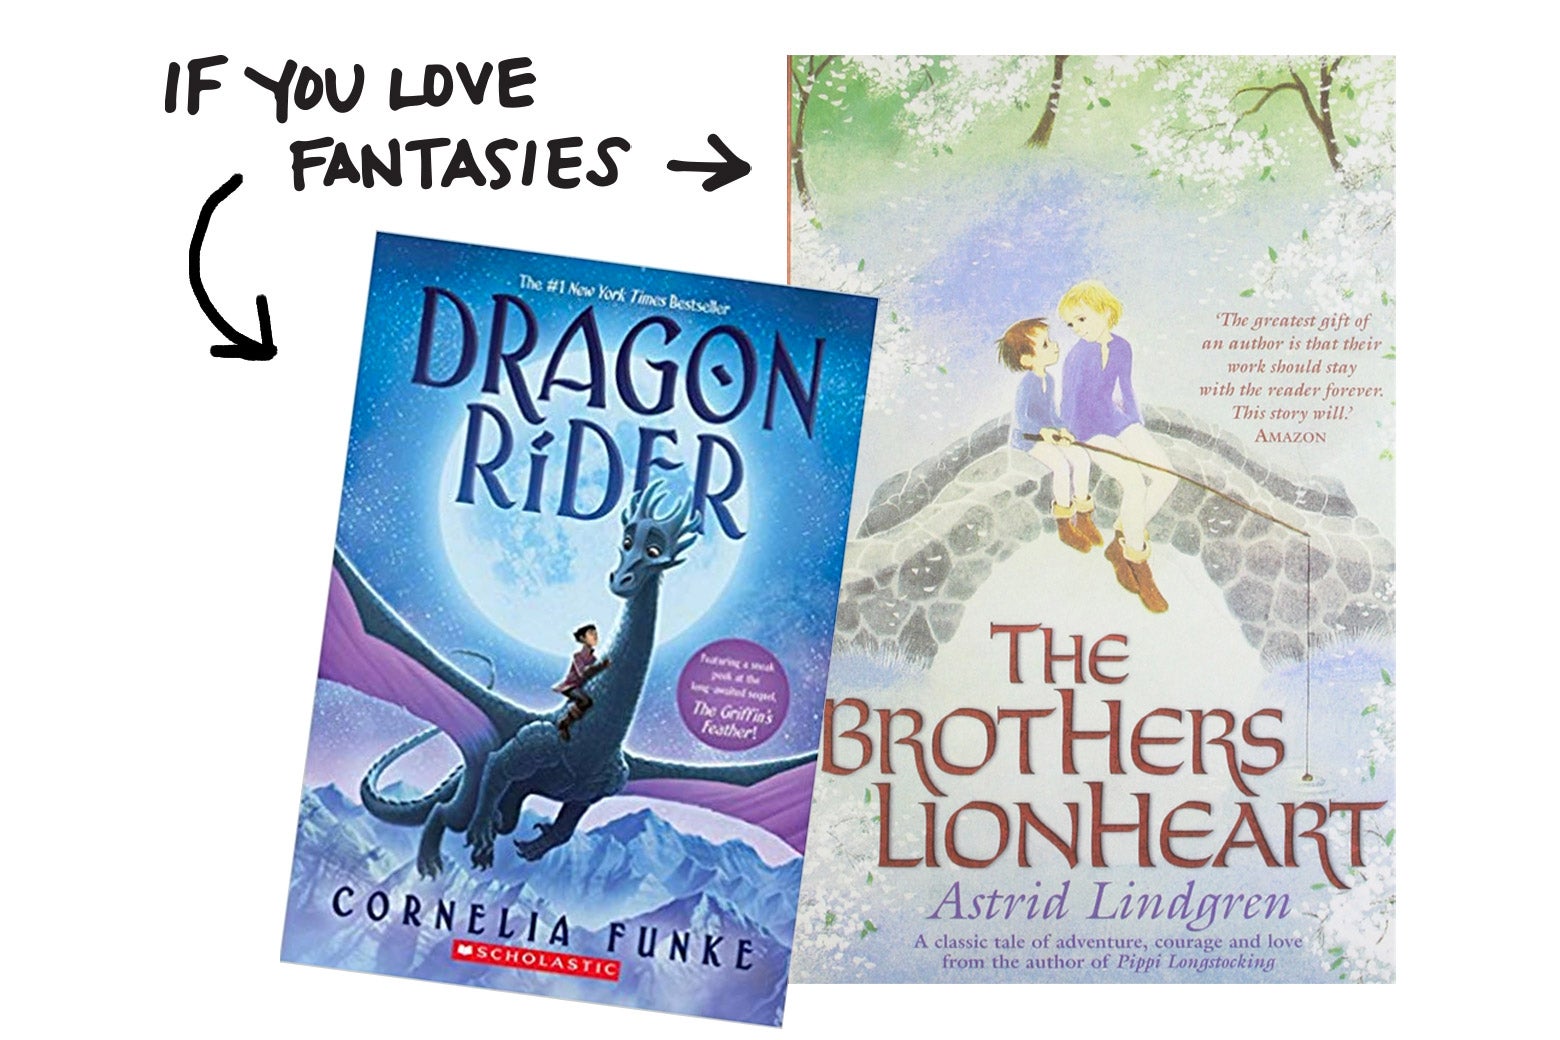 If you love fantasies like Dragon Ride, try The Brothers Lionheart.